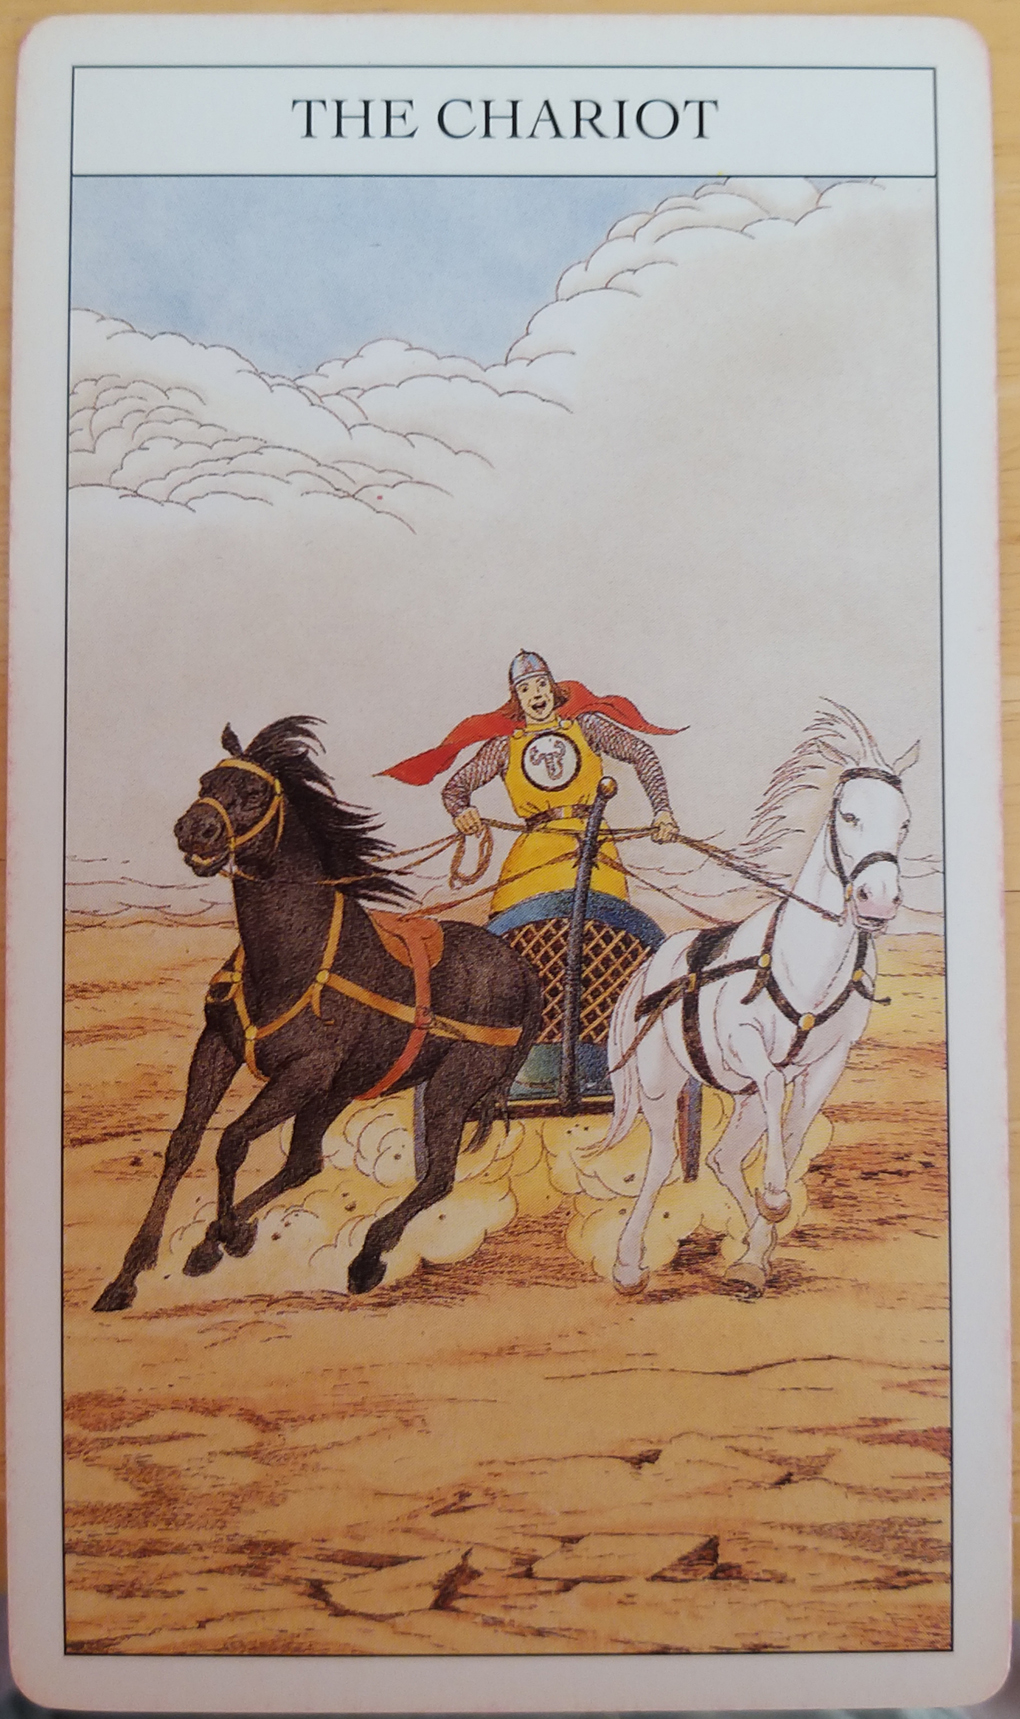 Tarot card depicting a charioteer in action, horses galloping through the desert